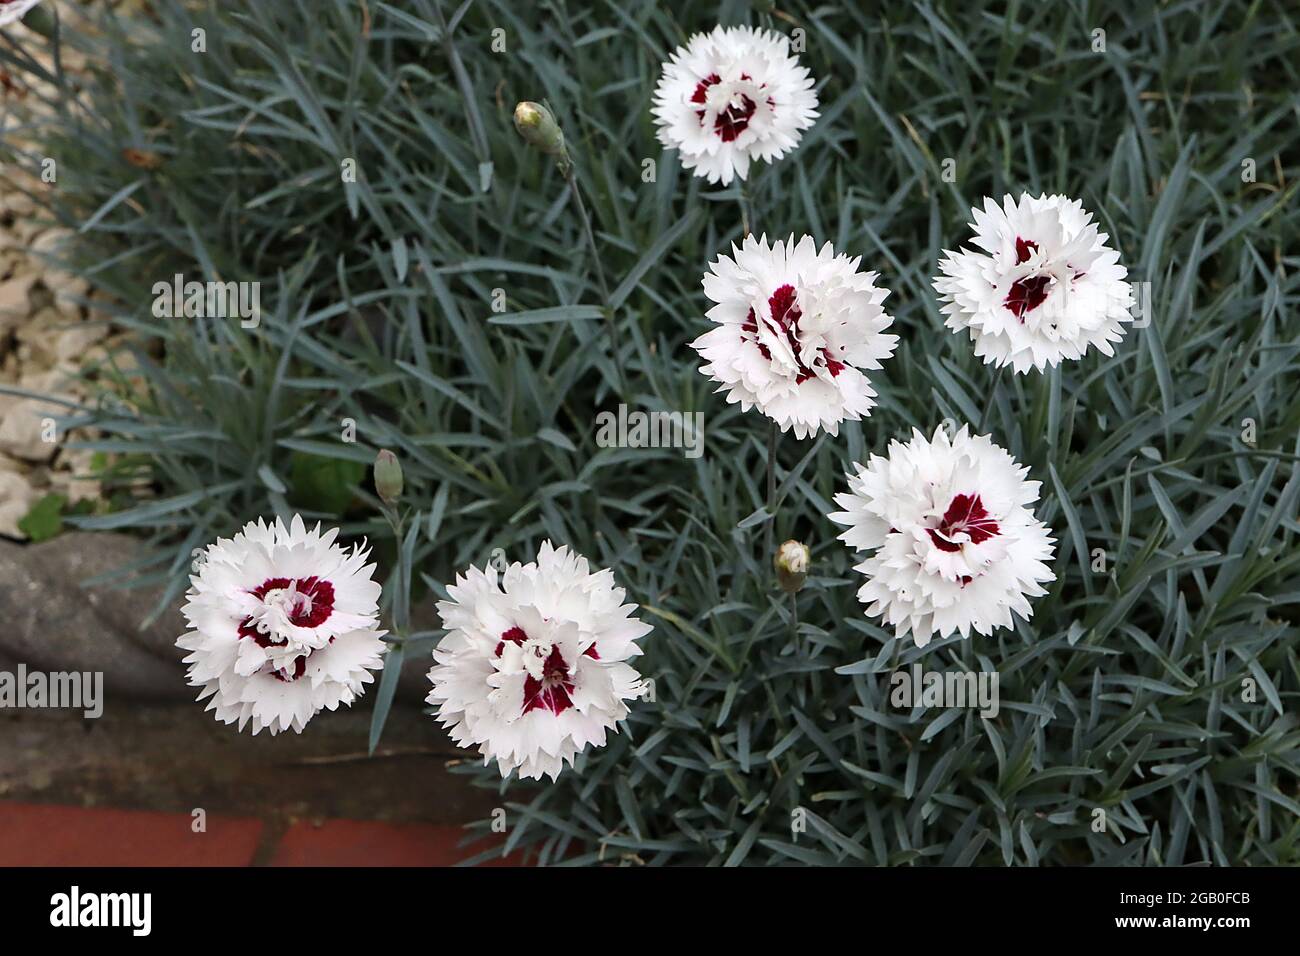 Dianthus ‘Silver Star’ alpine dianthus Silver Star – white flowers with purple eye and fringed petals,  June, England, UK Stock Photo